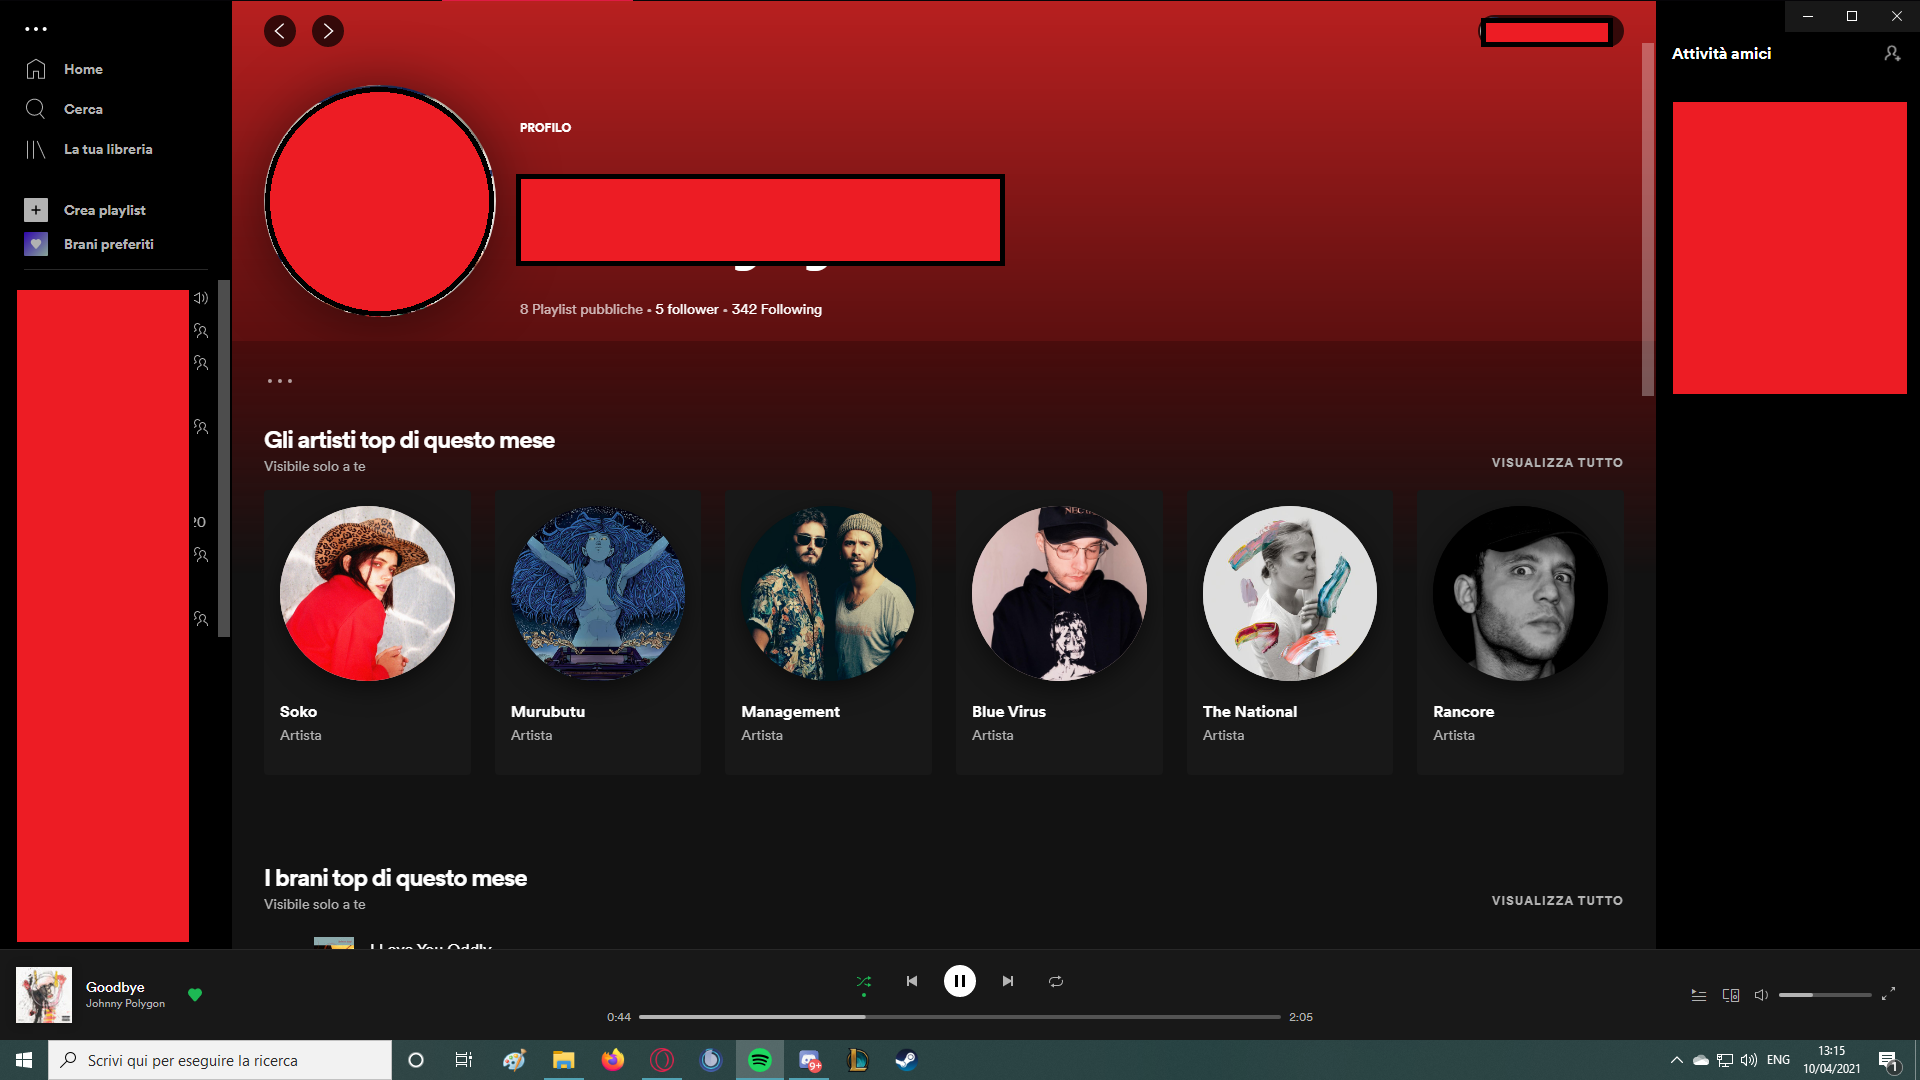 Desktop] Why is my profile red? - The Spotify Community